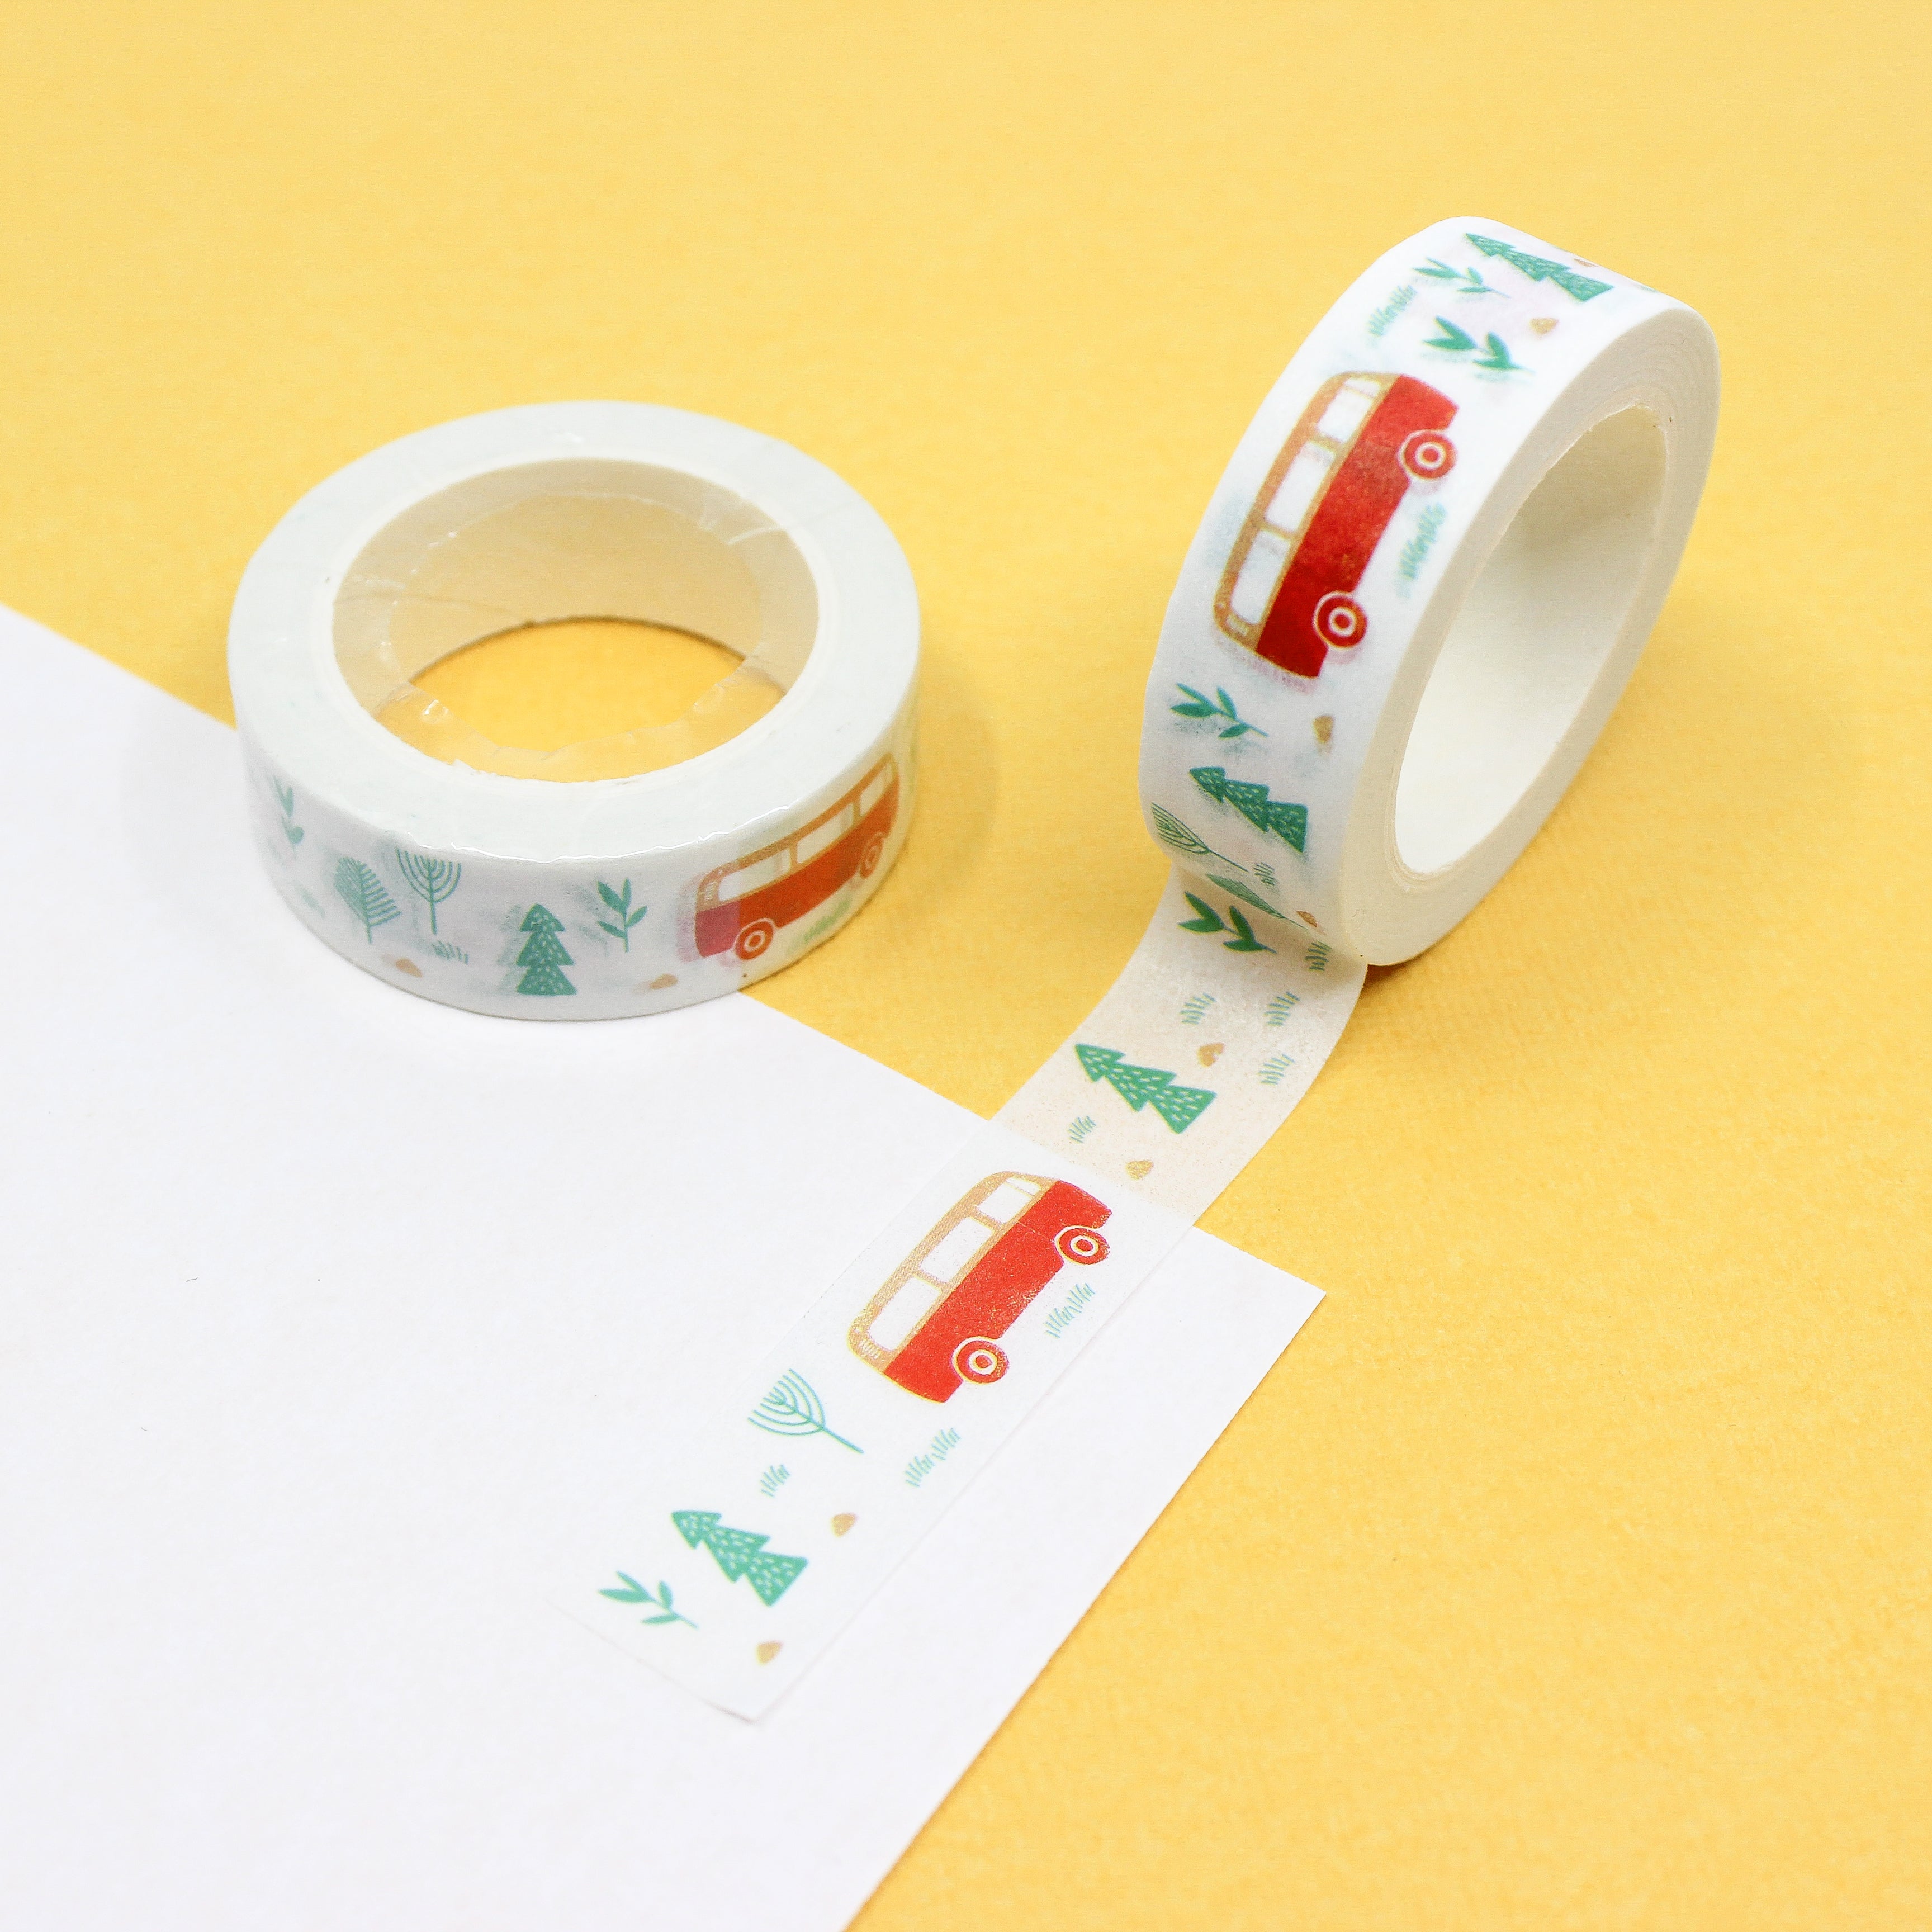 This is a red urban bus themed washi tape from BBB Supplies Craft Shop